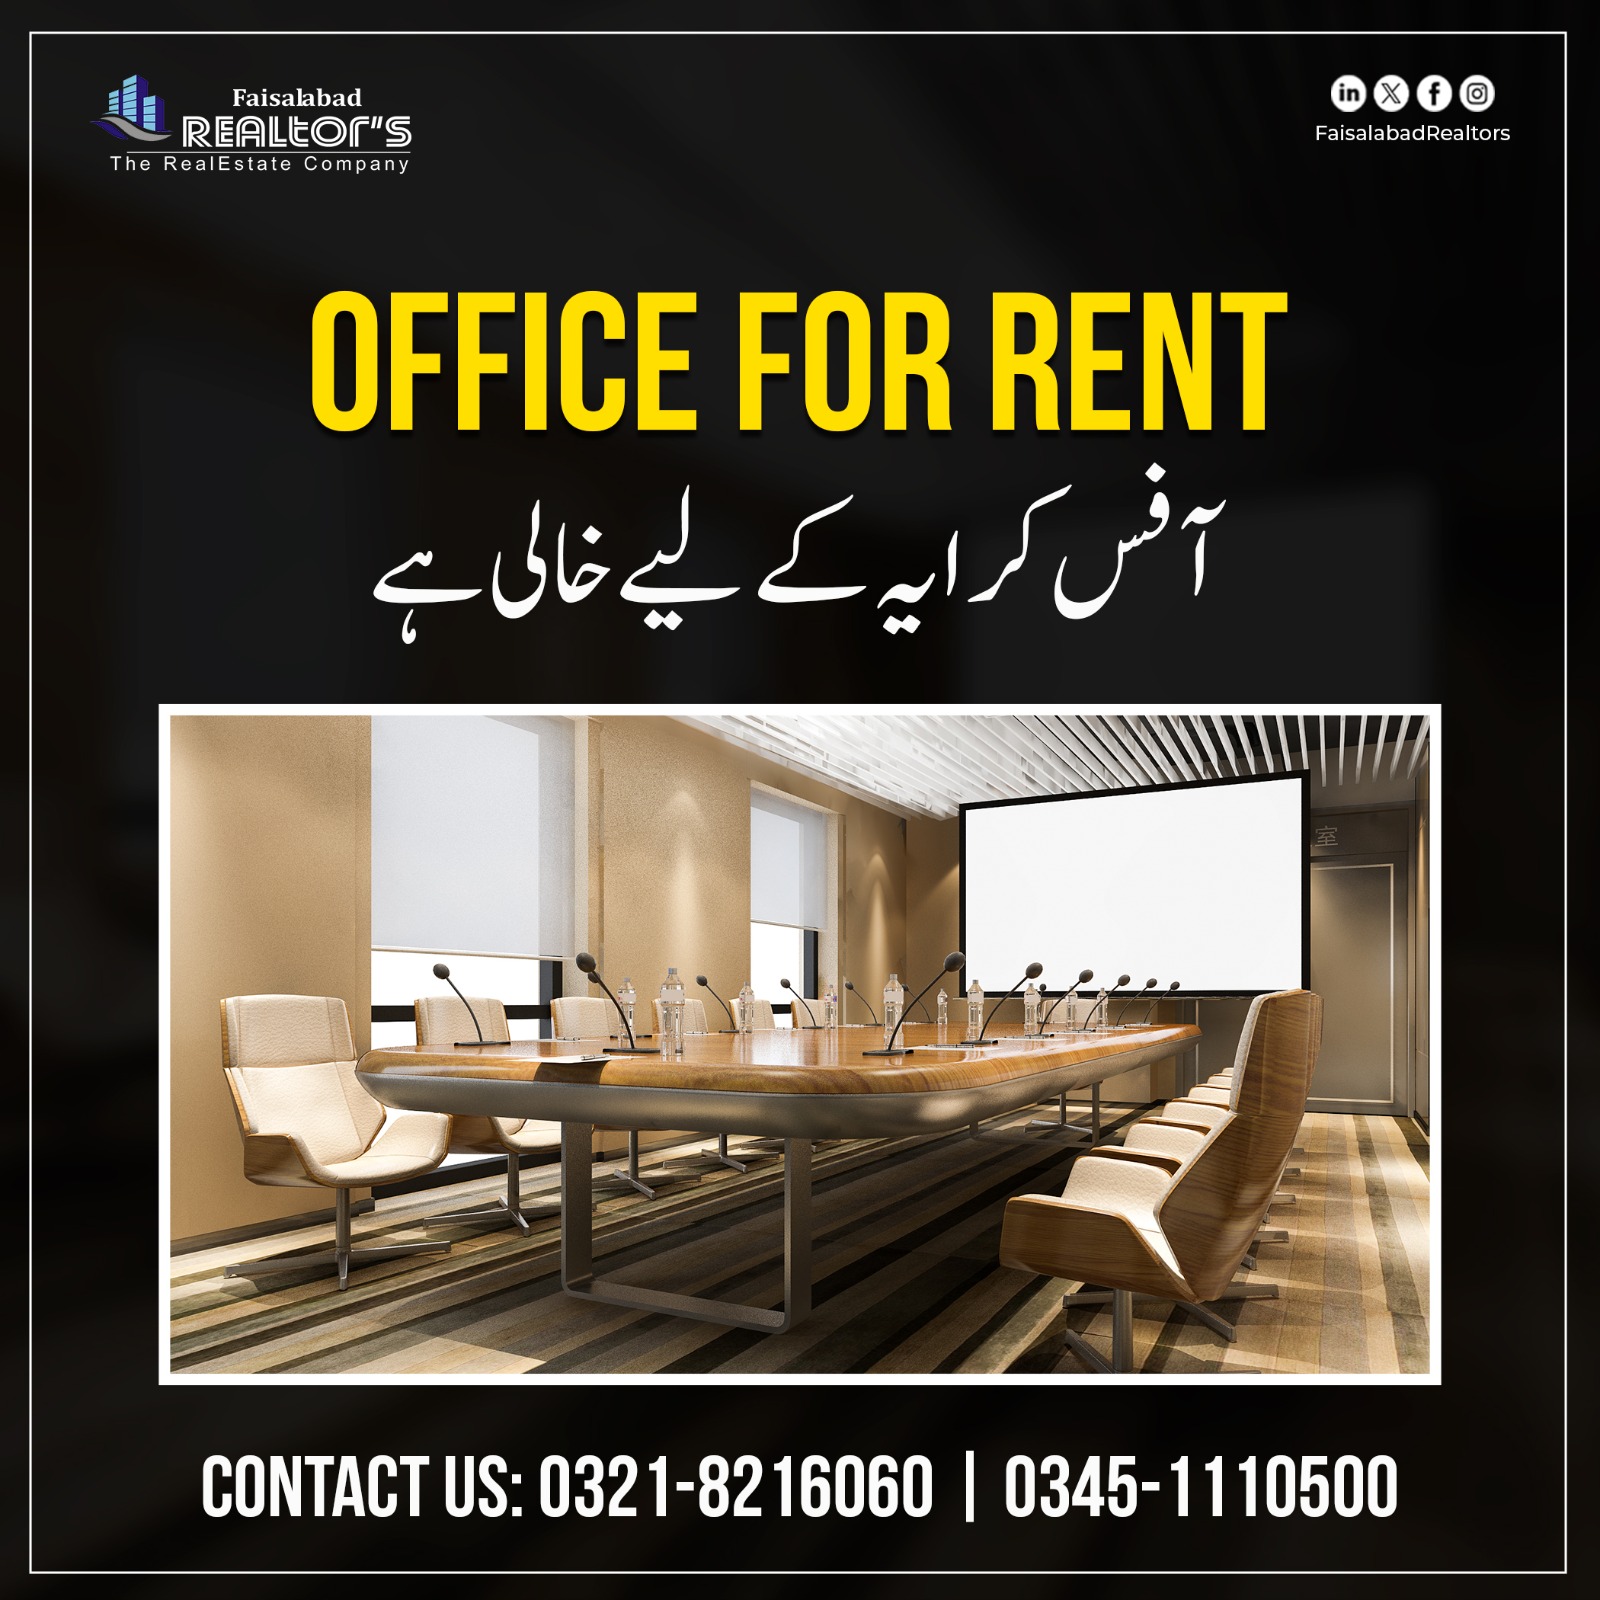 Office for Rent at Chen one road Faisalabad